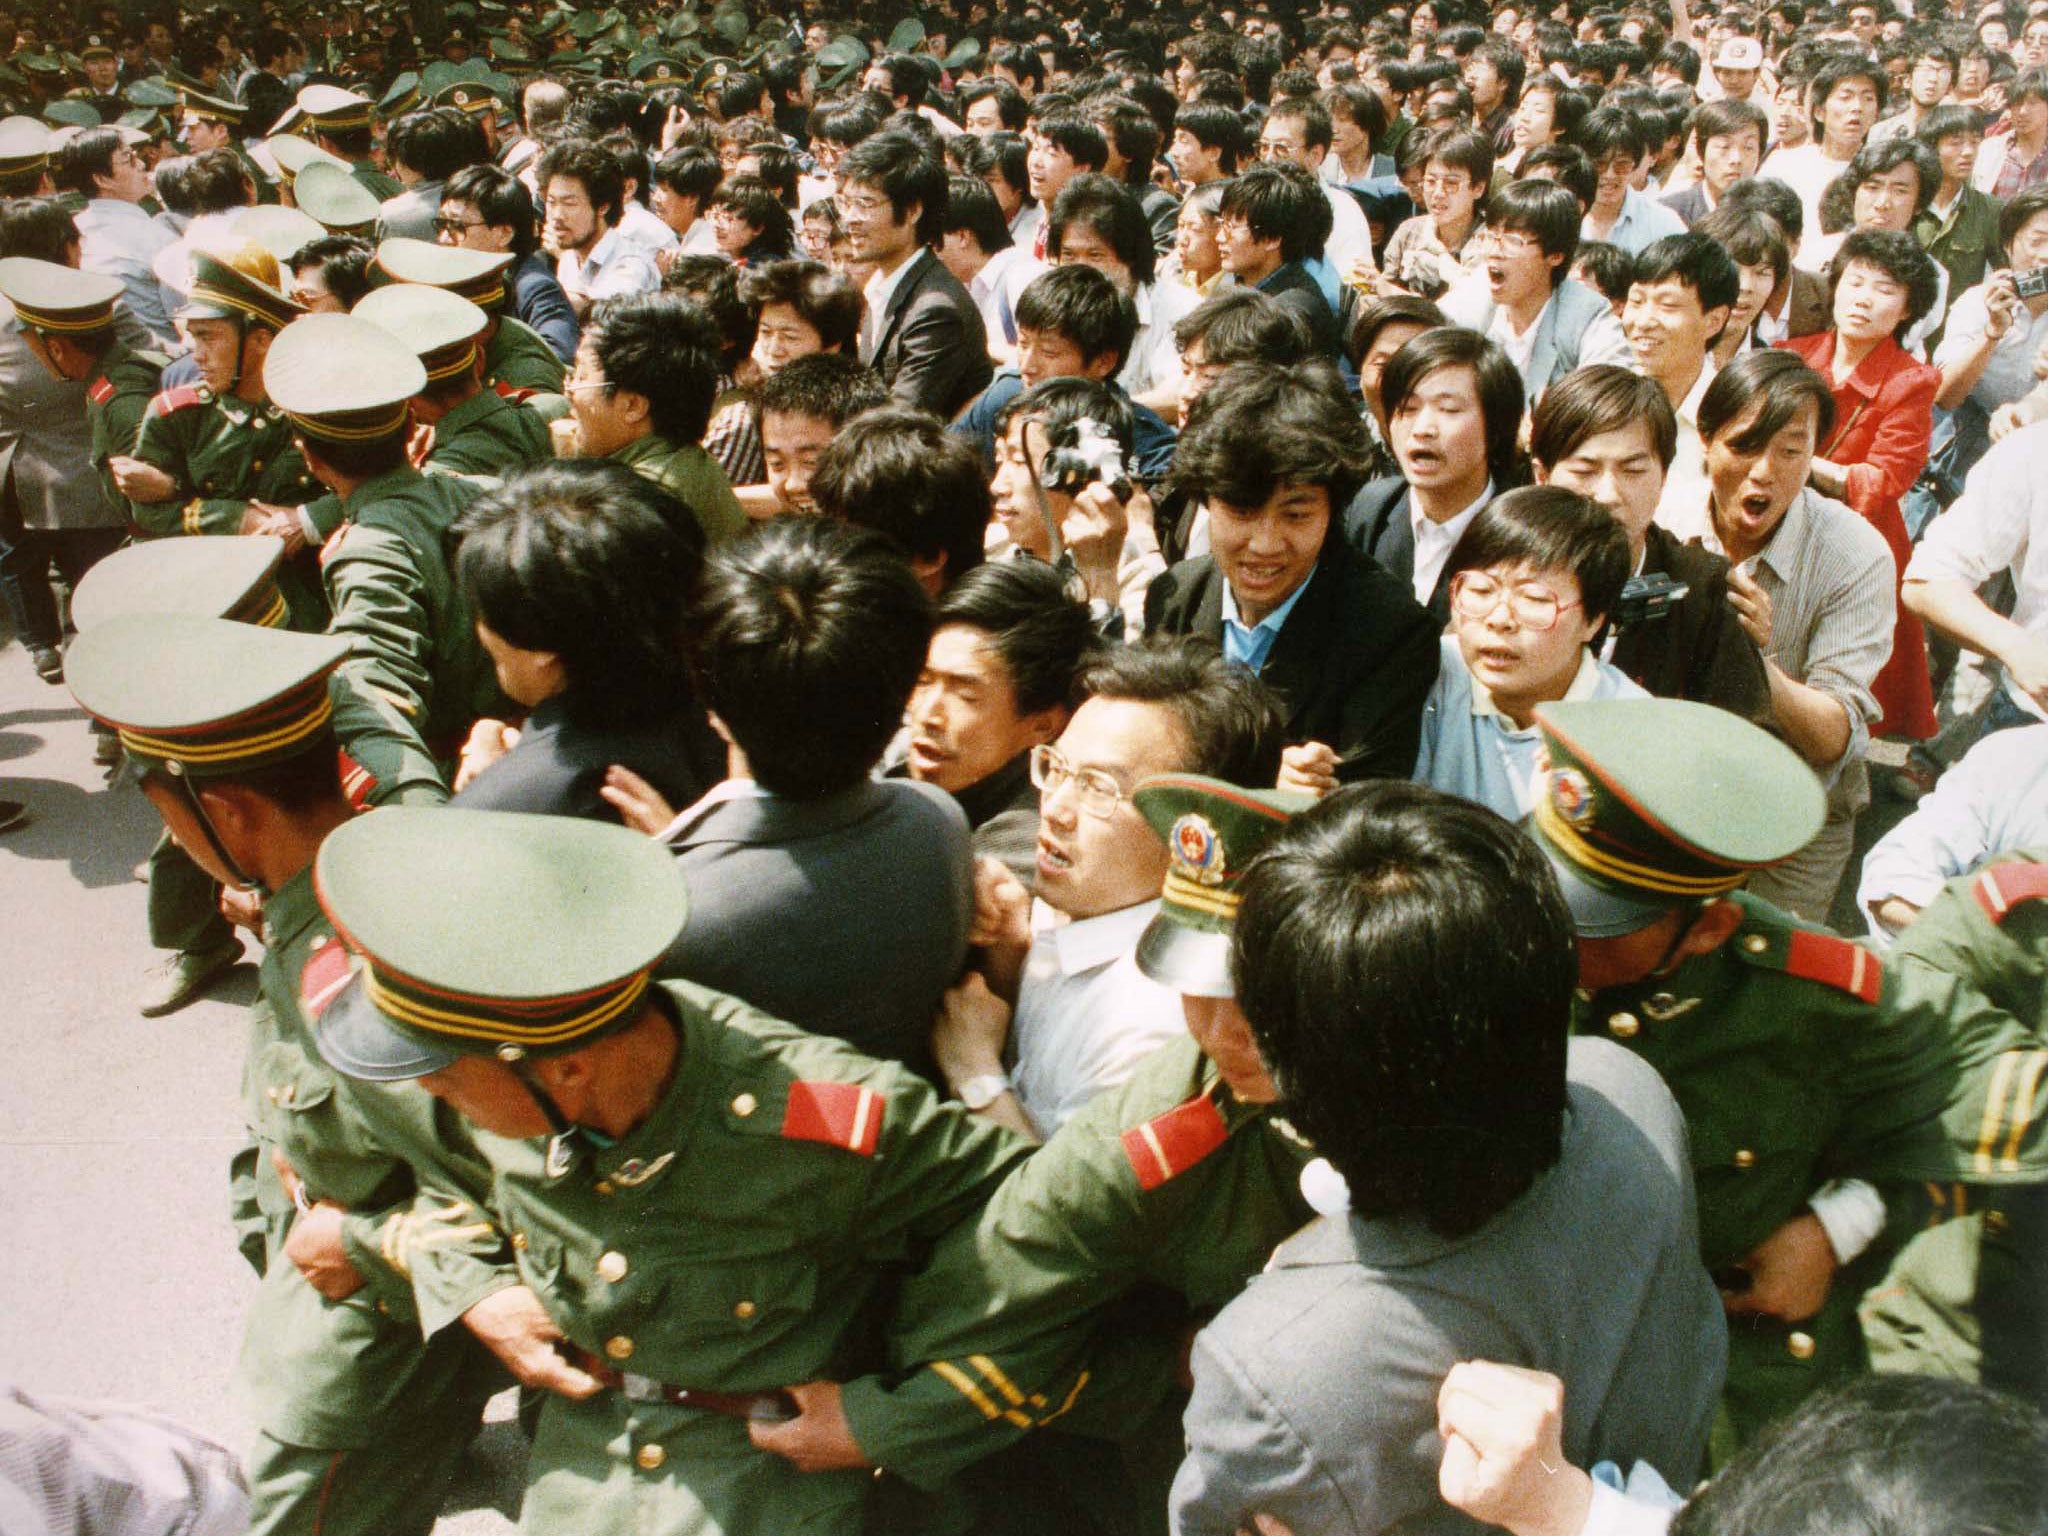 Crowds of jubilant students surge through a police cordon before pouring into Tiananmen Square on 4 June 1989. Wu'er Kaixi managed to escape into exile in the crackdown that followed